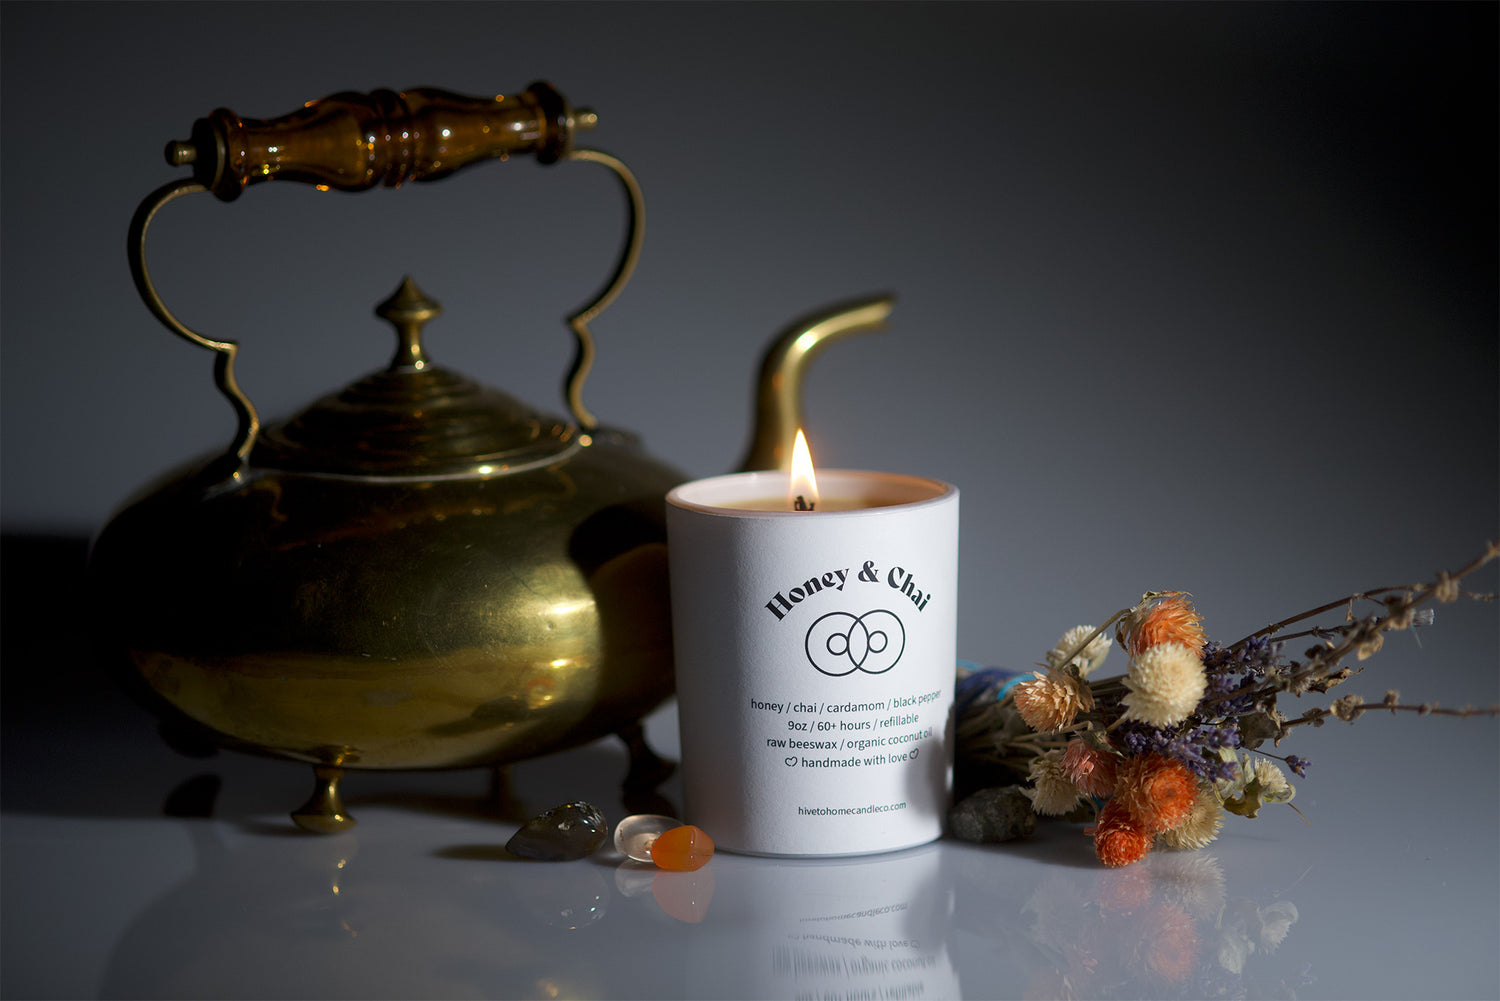 Scent Guide Image of Hive To Home Candle Co's Honey & Chai scented beeswax candle.